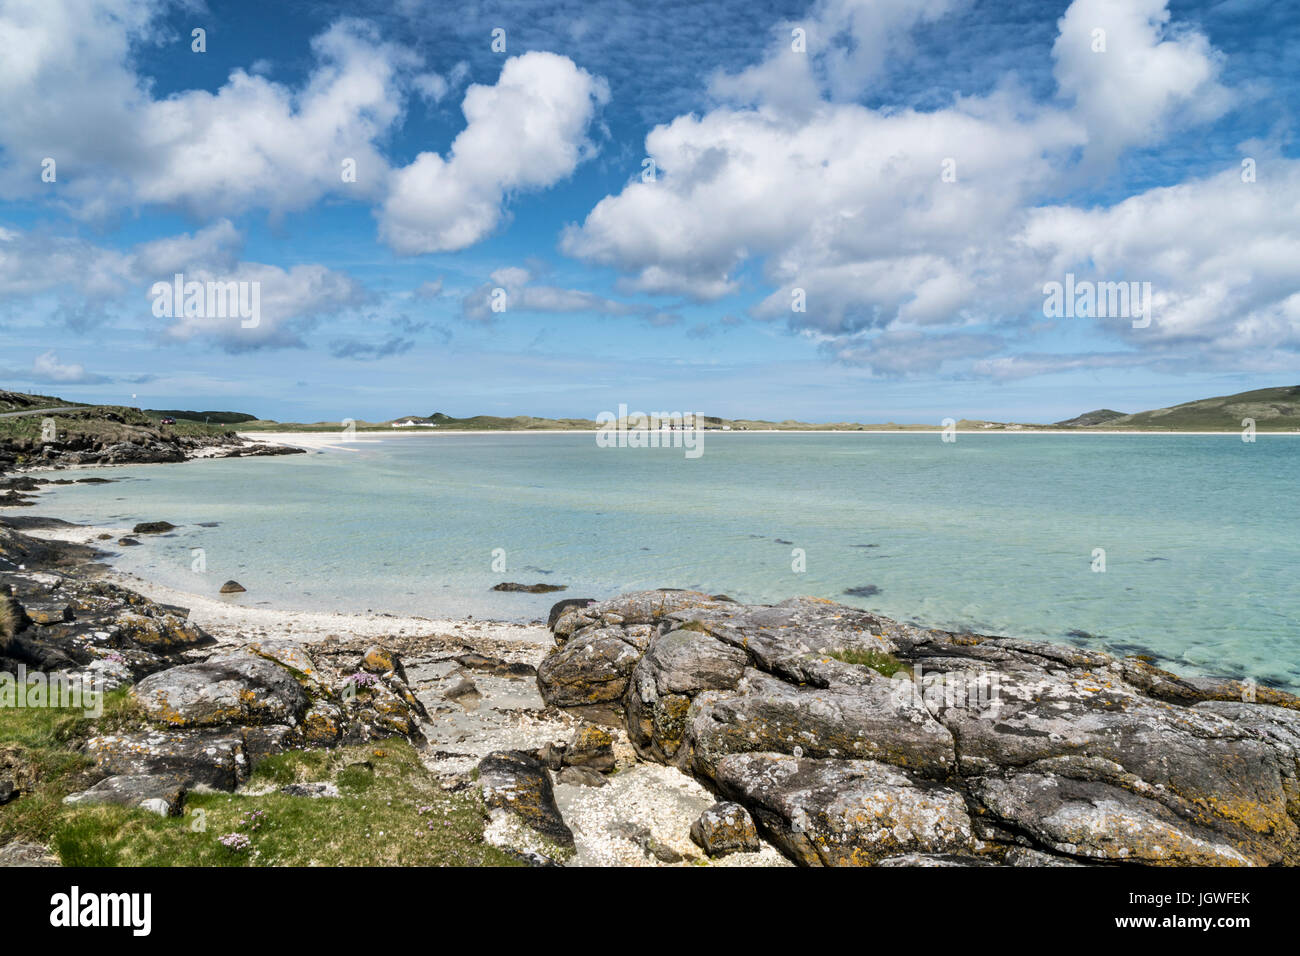 Wide shallow bay of Traigh Mhòr, Barra, Outer Hebrides Stock Photo